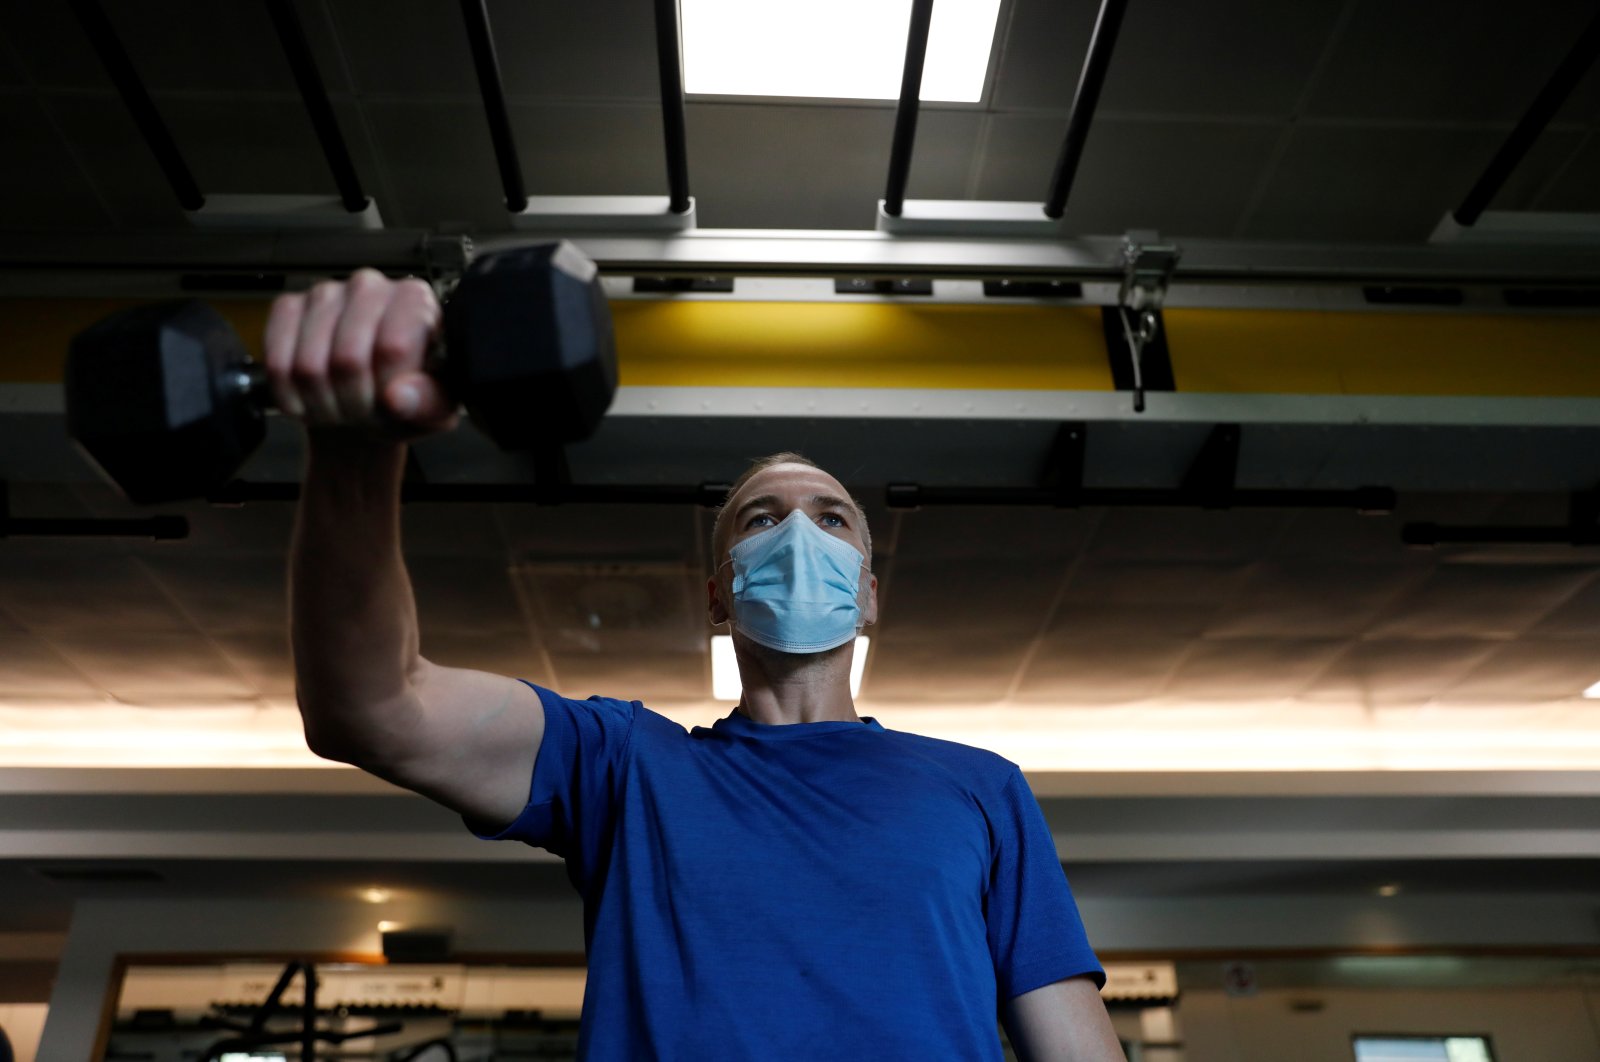 A man trains in a gym on the first day of the reopening of gyms after a countrywide lockdown, amid the coronavirus disease (COVID-19) pandemic, Lisbon, Portugal, April 5, 2021. (REUTERS Photo)